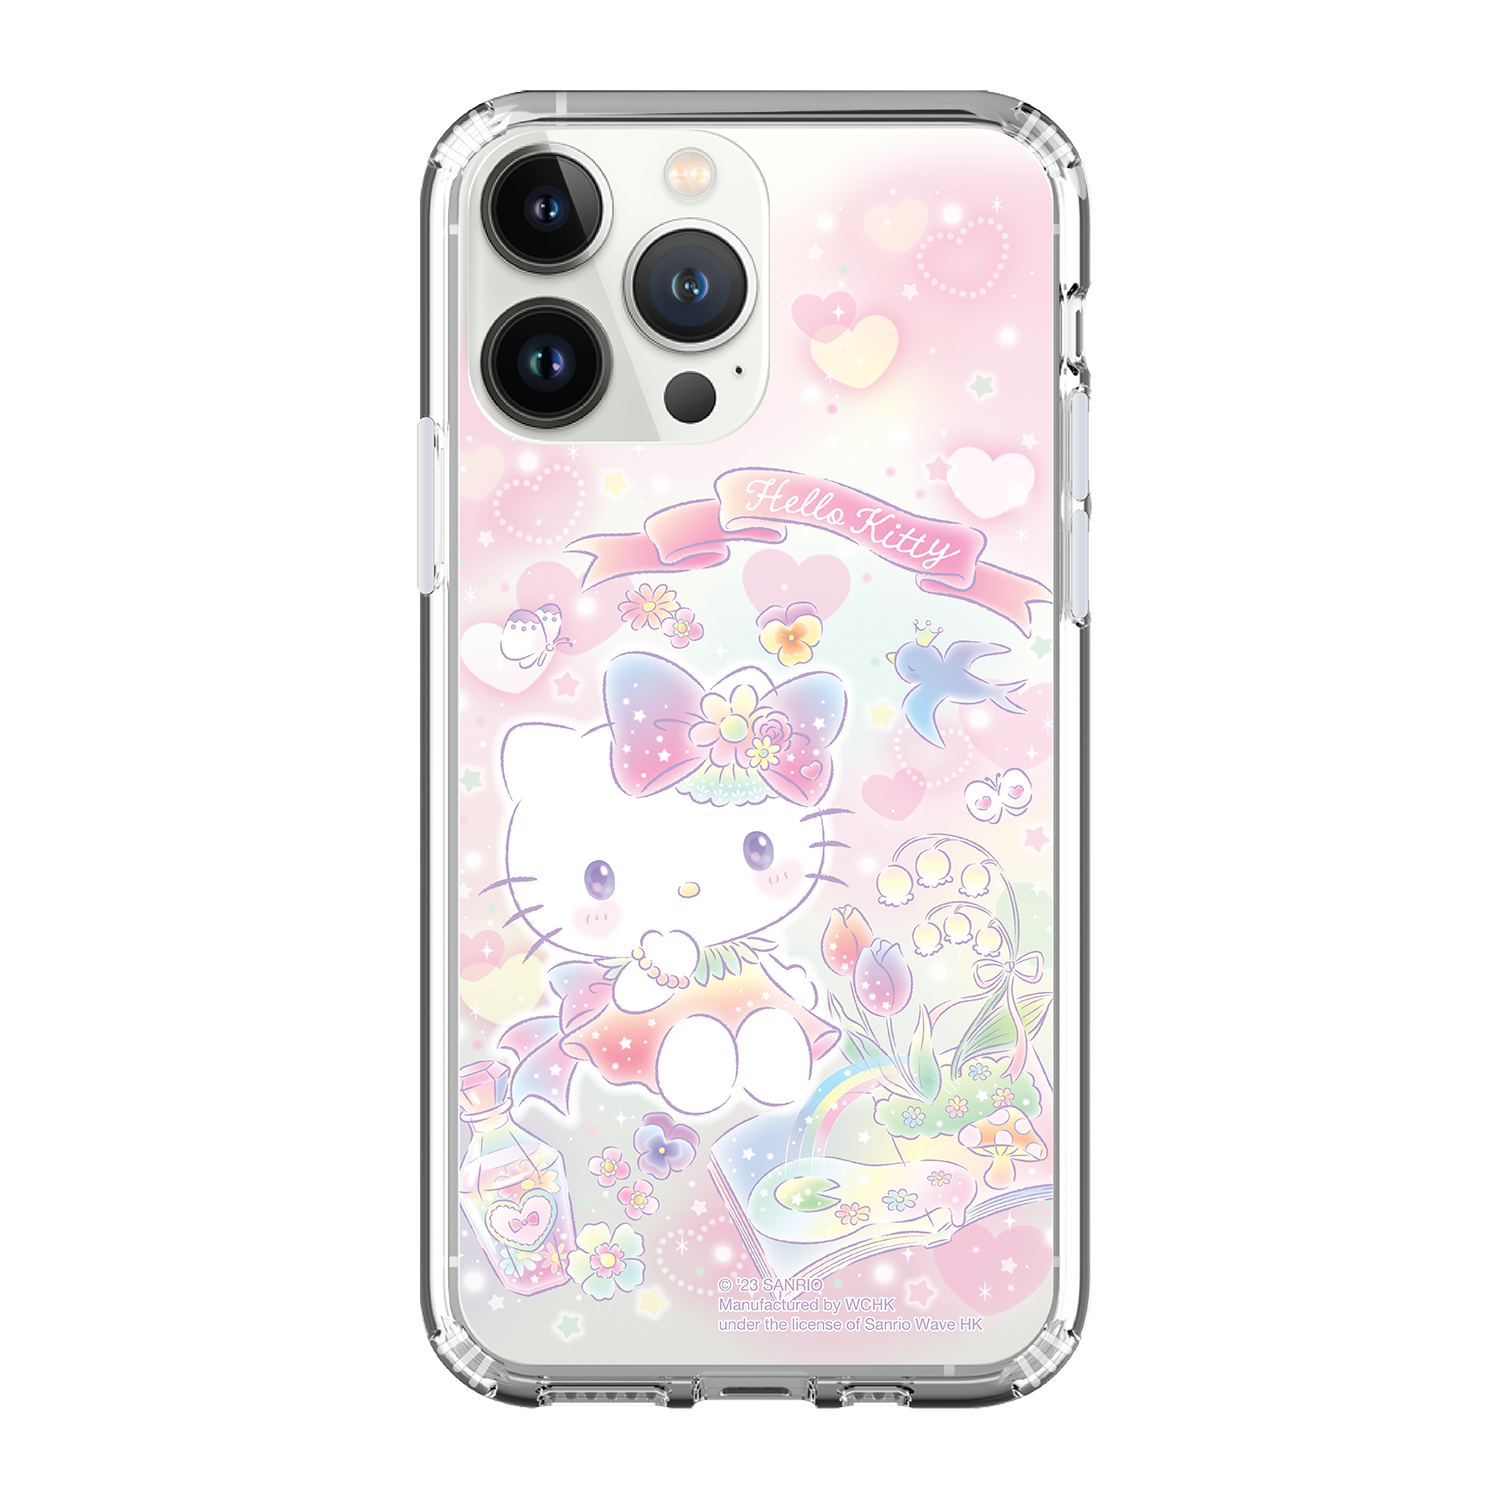 Hello Kitty Clear Case / iPhone Case / Android Case / Samsung Case 正版授權 全包邊氣囊防撞手機殼 (KT161)